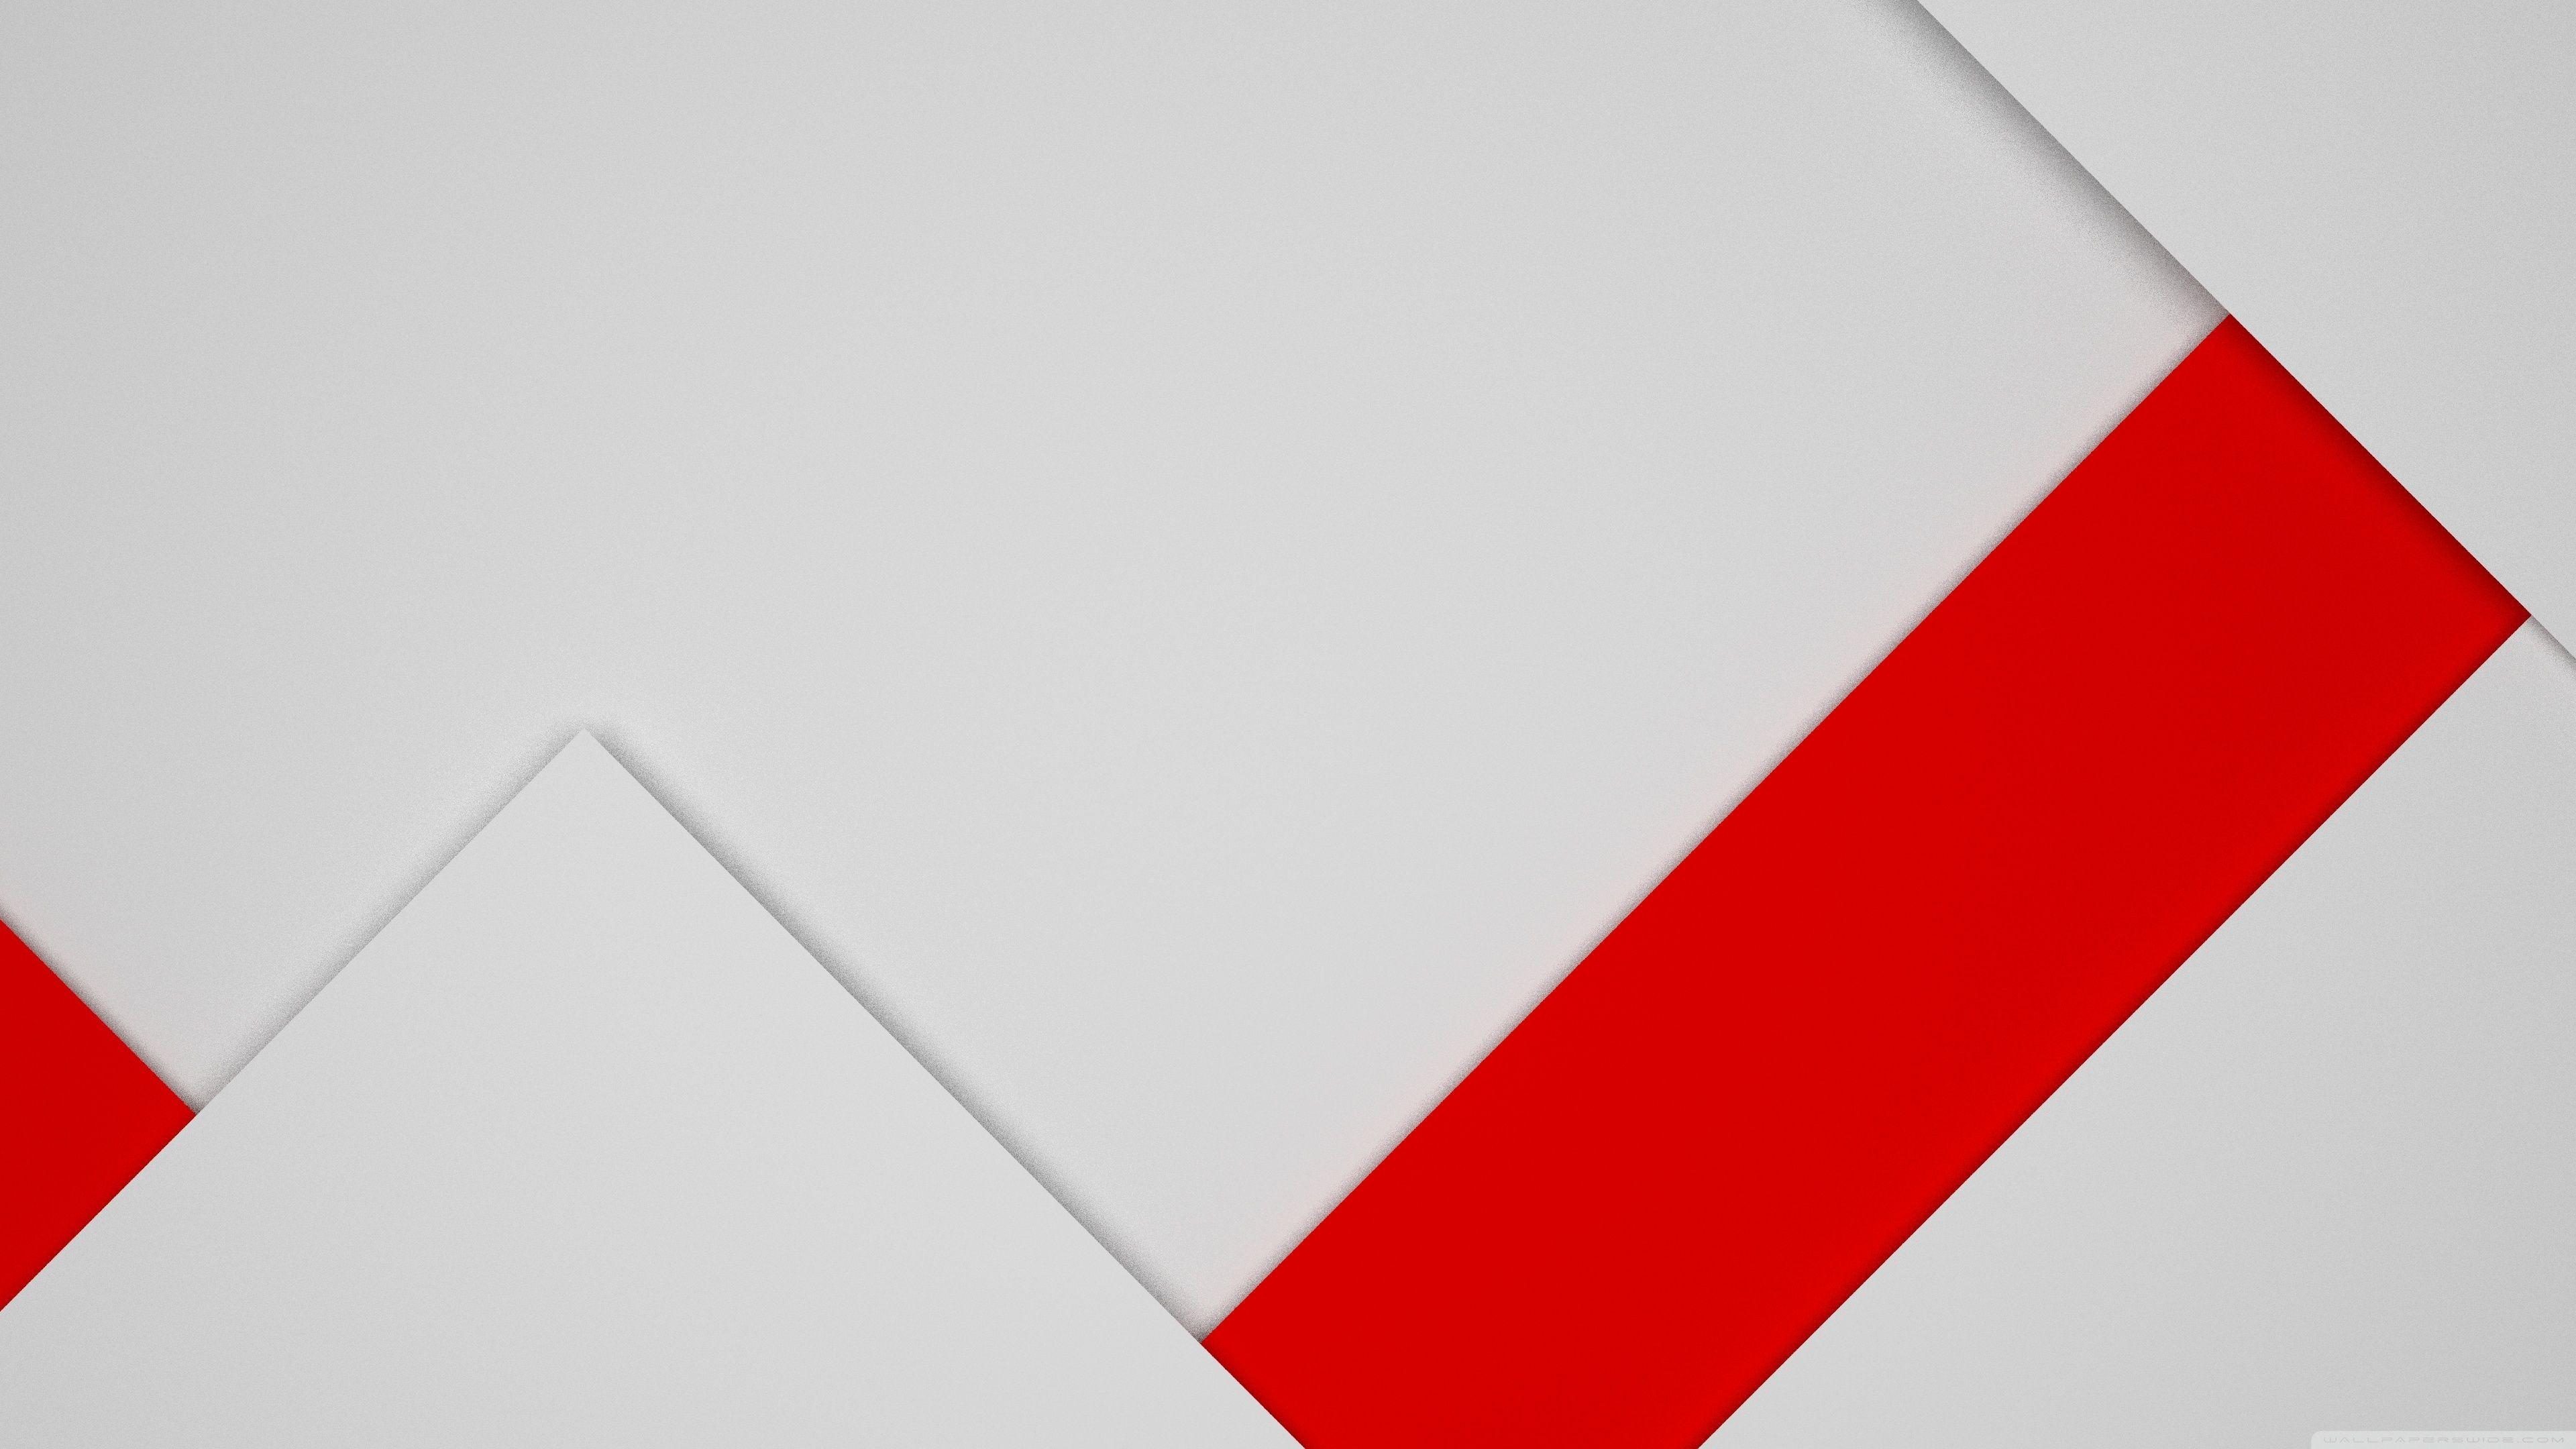 Wallpaper Red Abstract Polygons White Bg By Kaminohunter Dau2co6